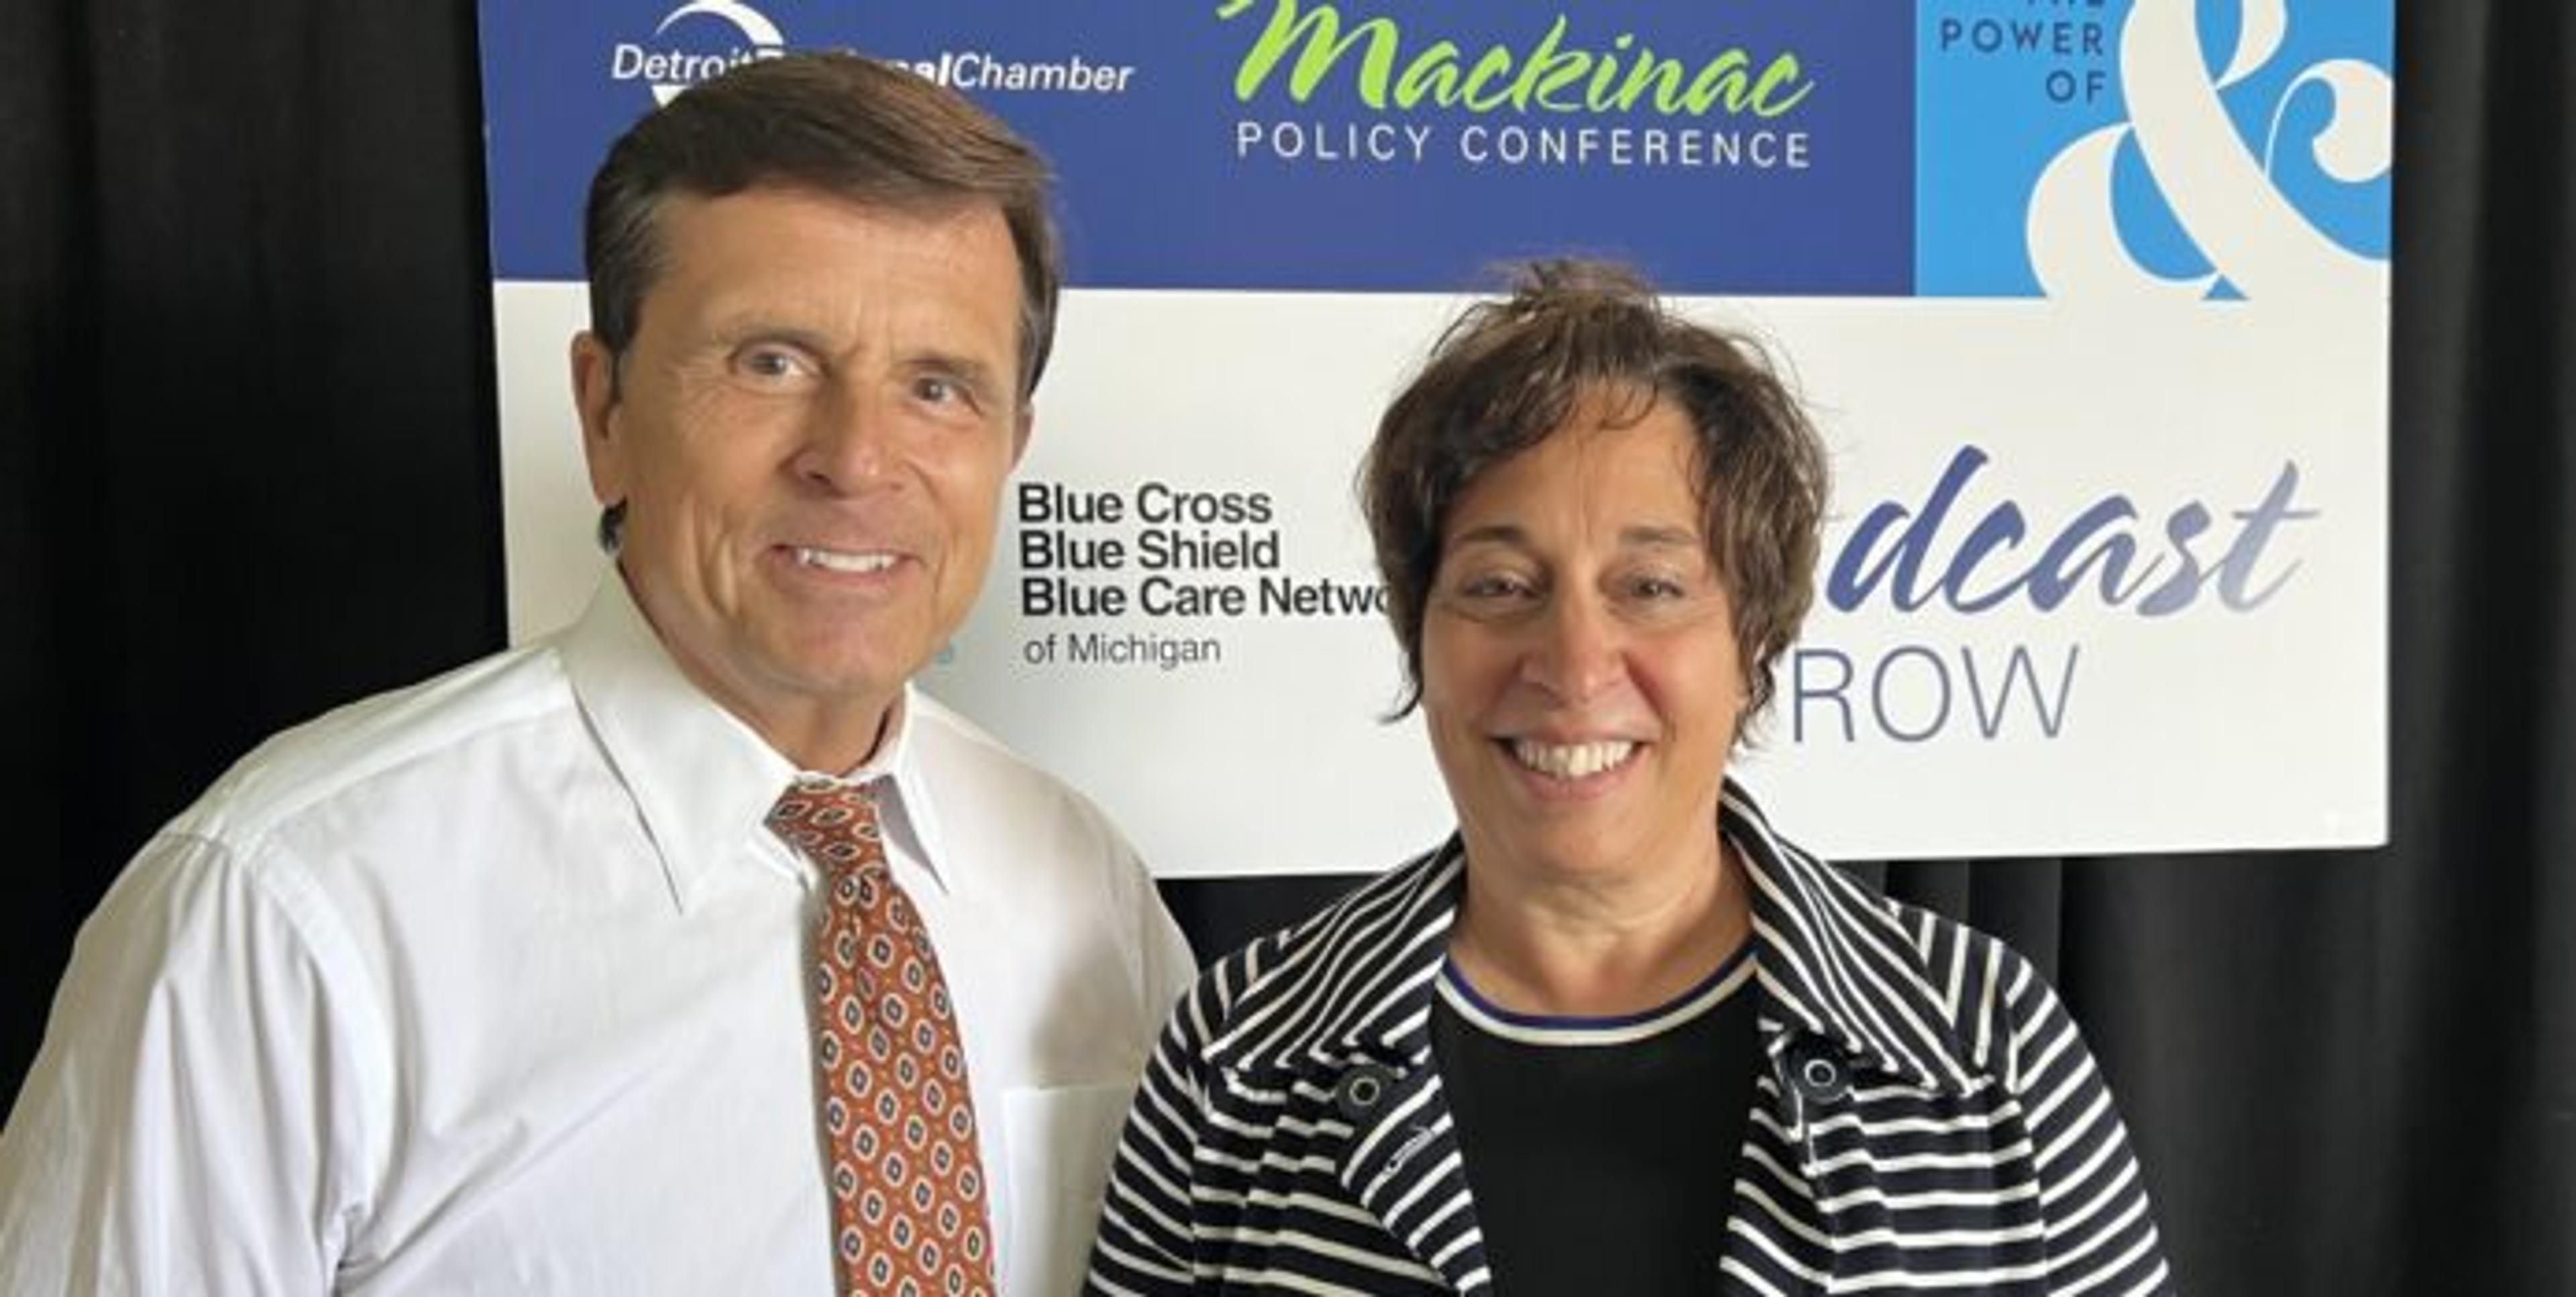 Mackinac Policy Conference 2023 - Chuck Gaidica with Lynda Rossi